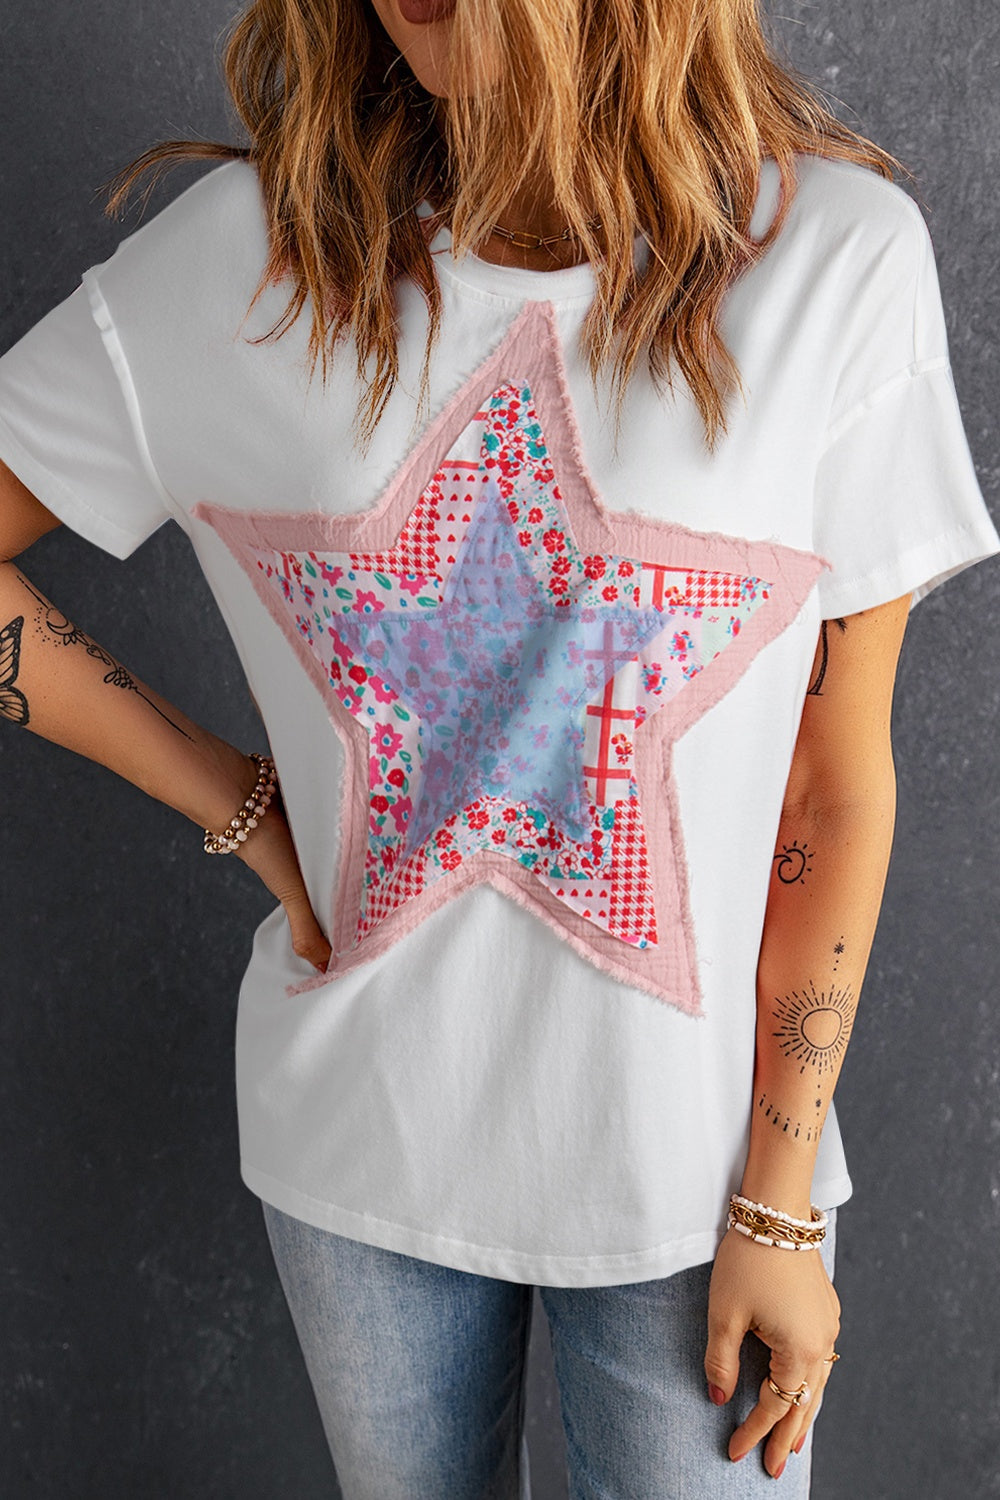 Star Round Neck Short Sleeve T-Shirt in Pink or White - Sydney So Sweet